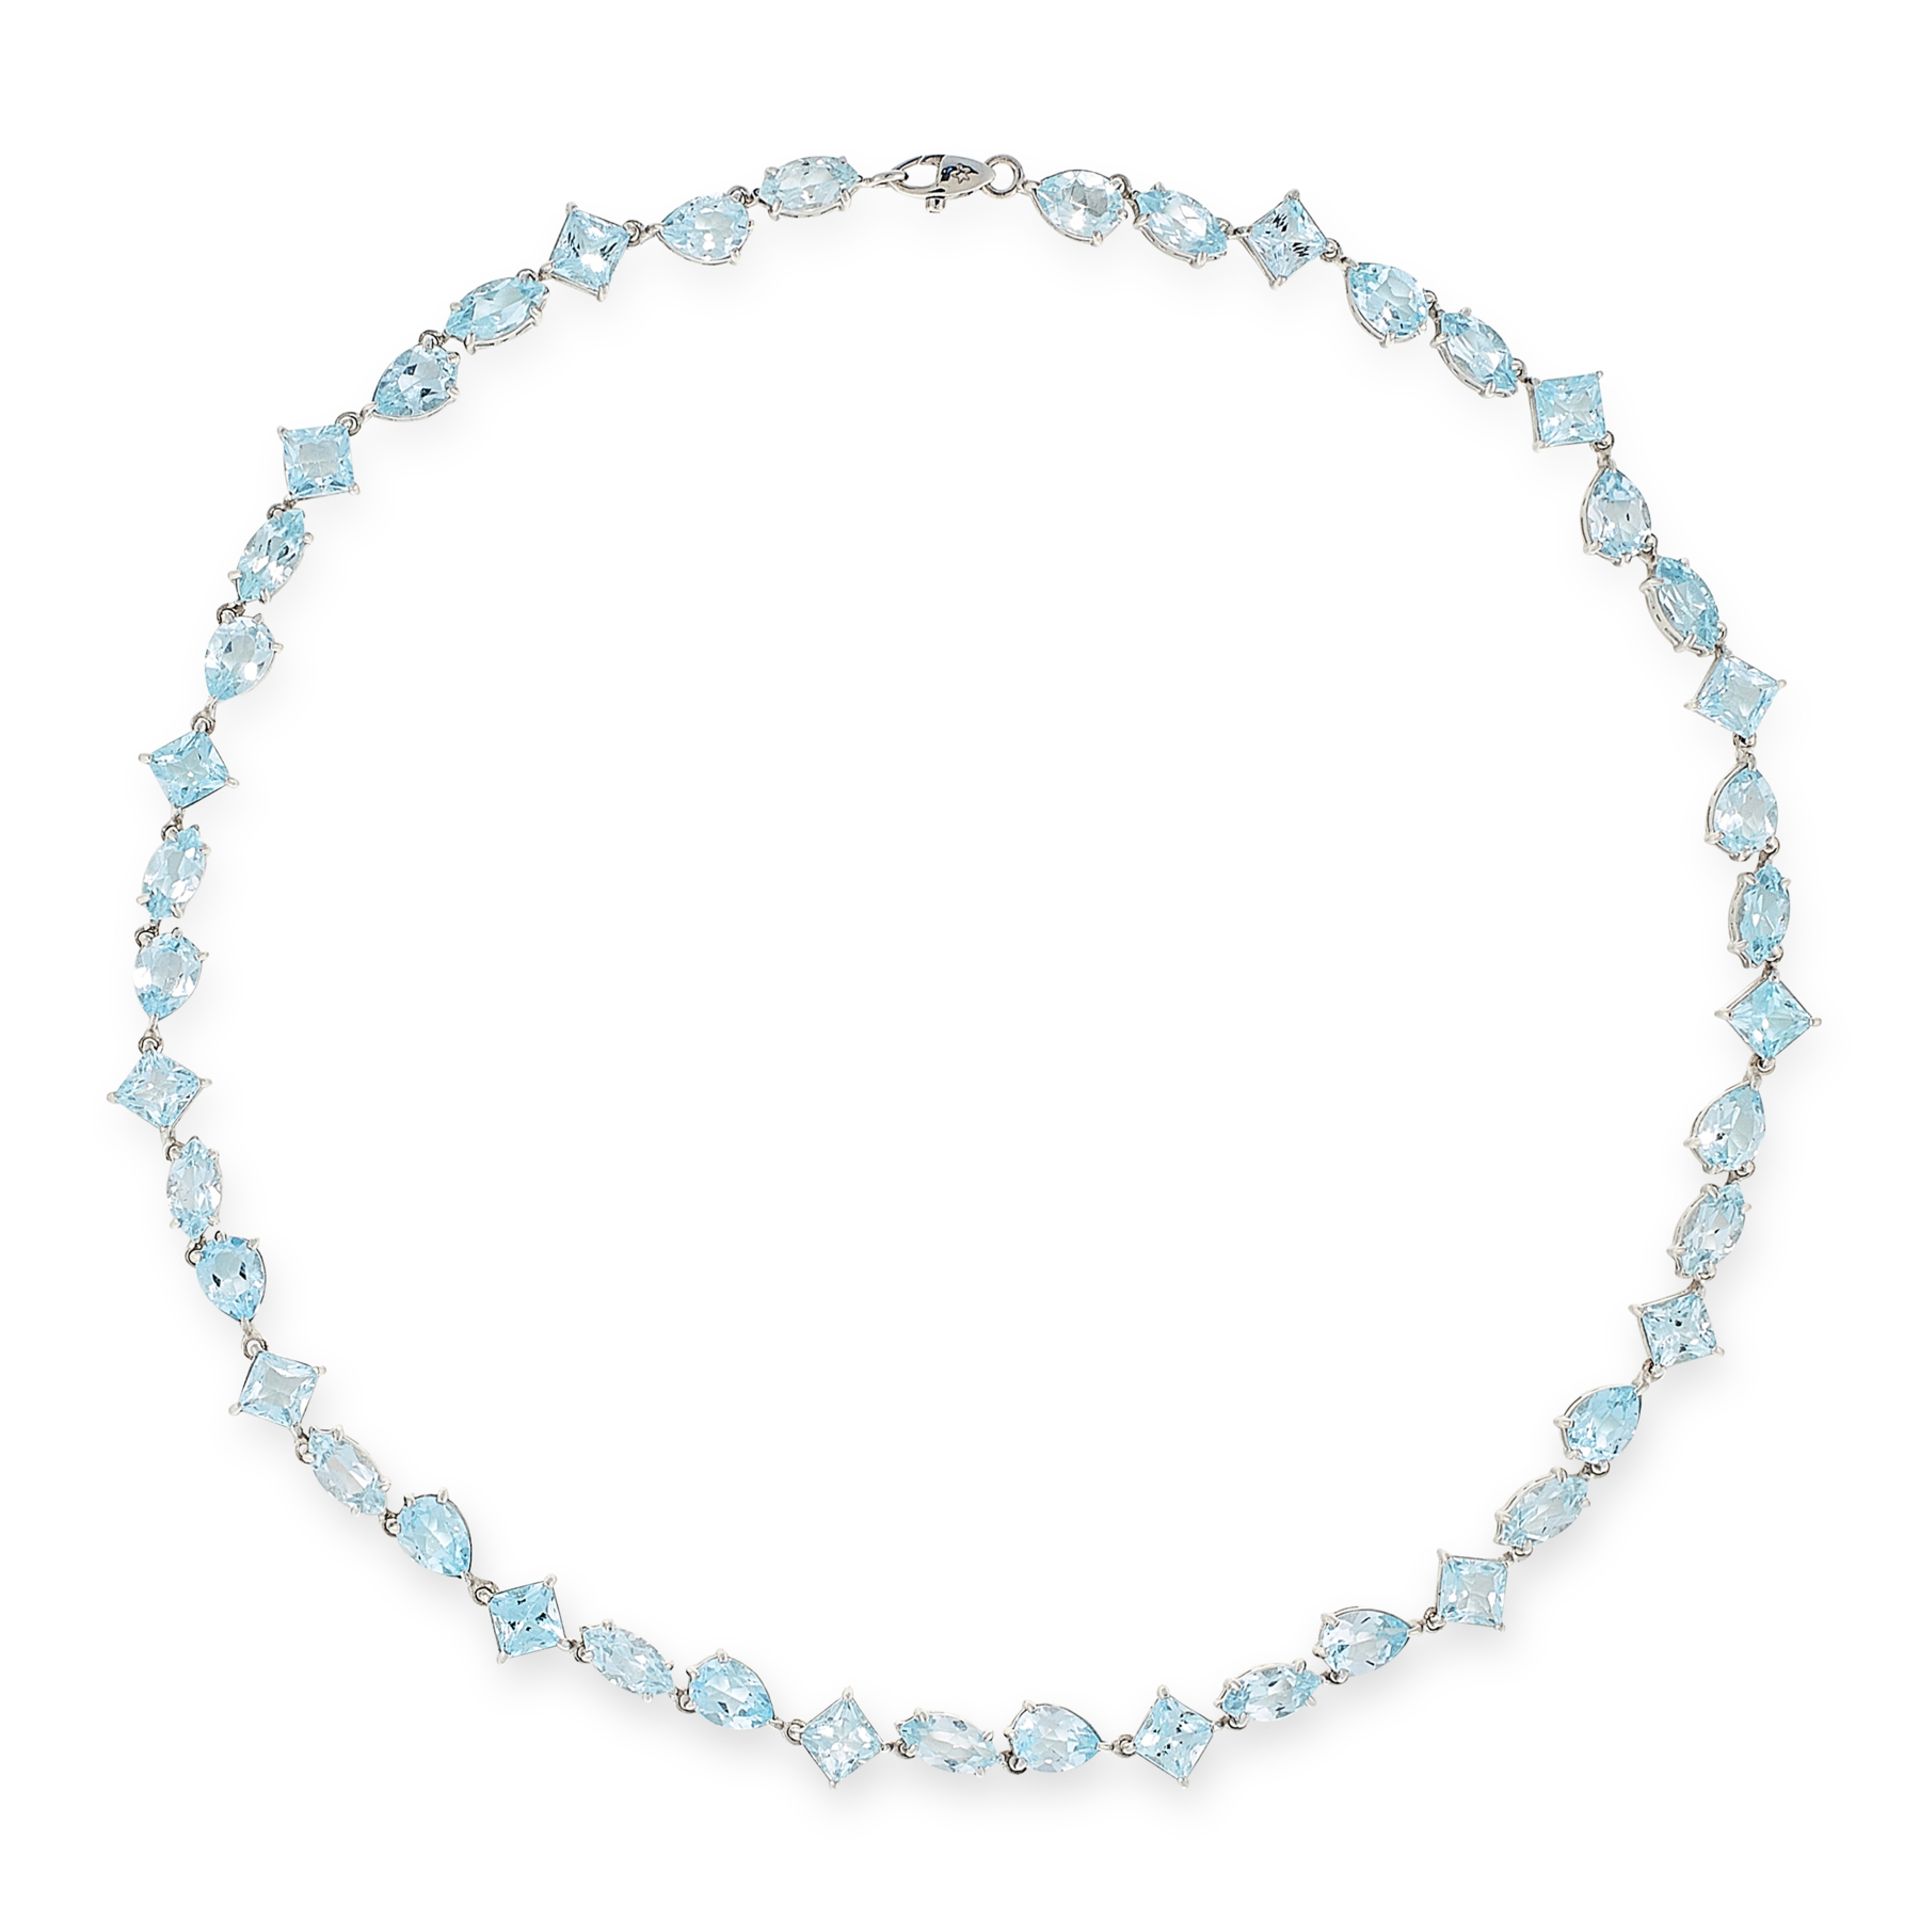 AN AQUAMARINE NECKLACE in 18ct white gold, comprising a single row of forty-four marquise, pear